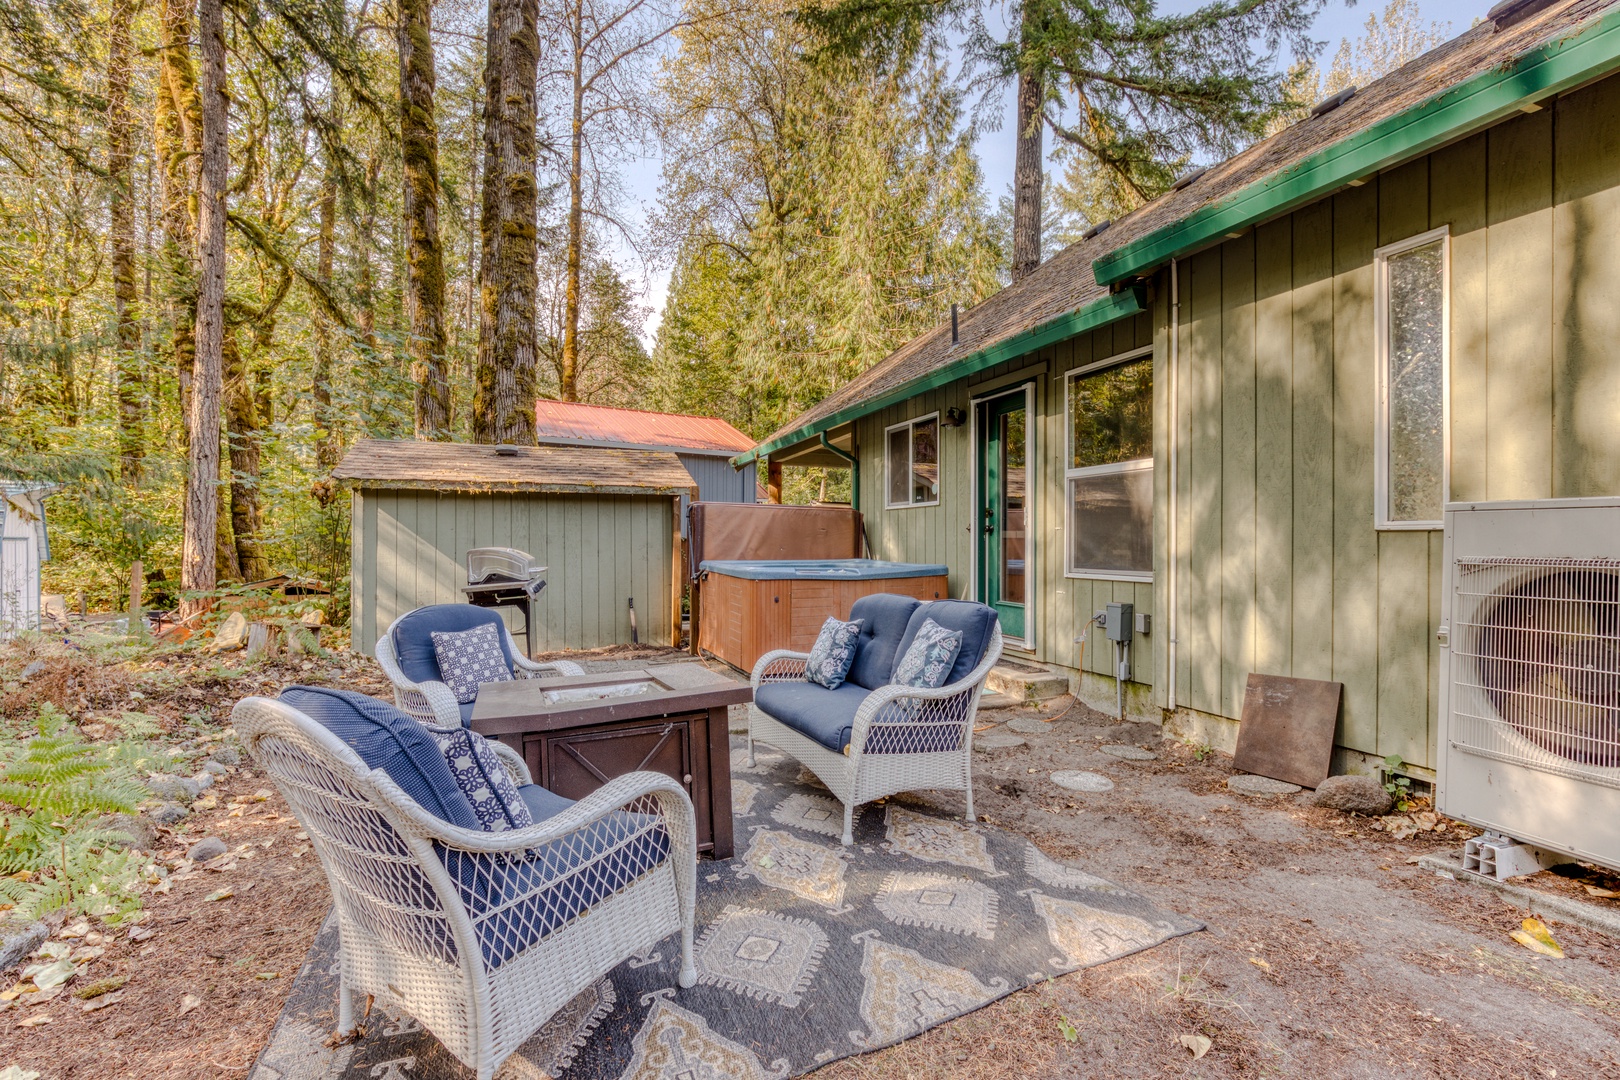 Brightwood Vacation Rentals, Riverside Retreat - Sit back and admire the natural beauty of Mt Hood